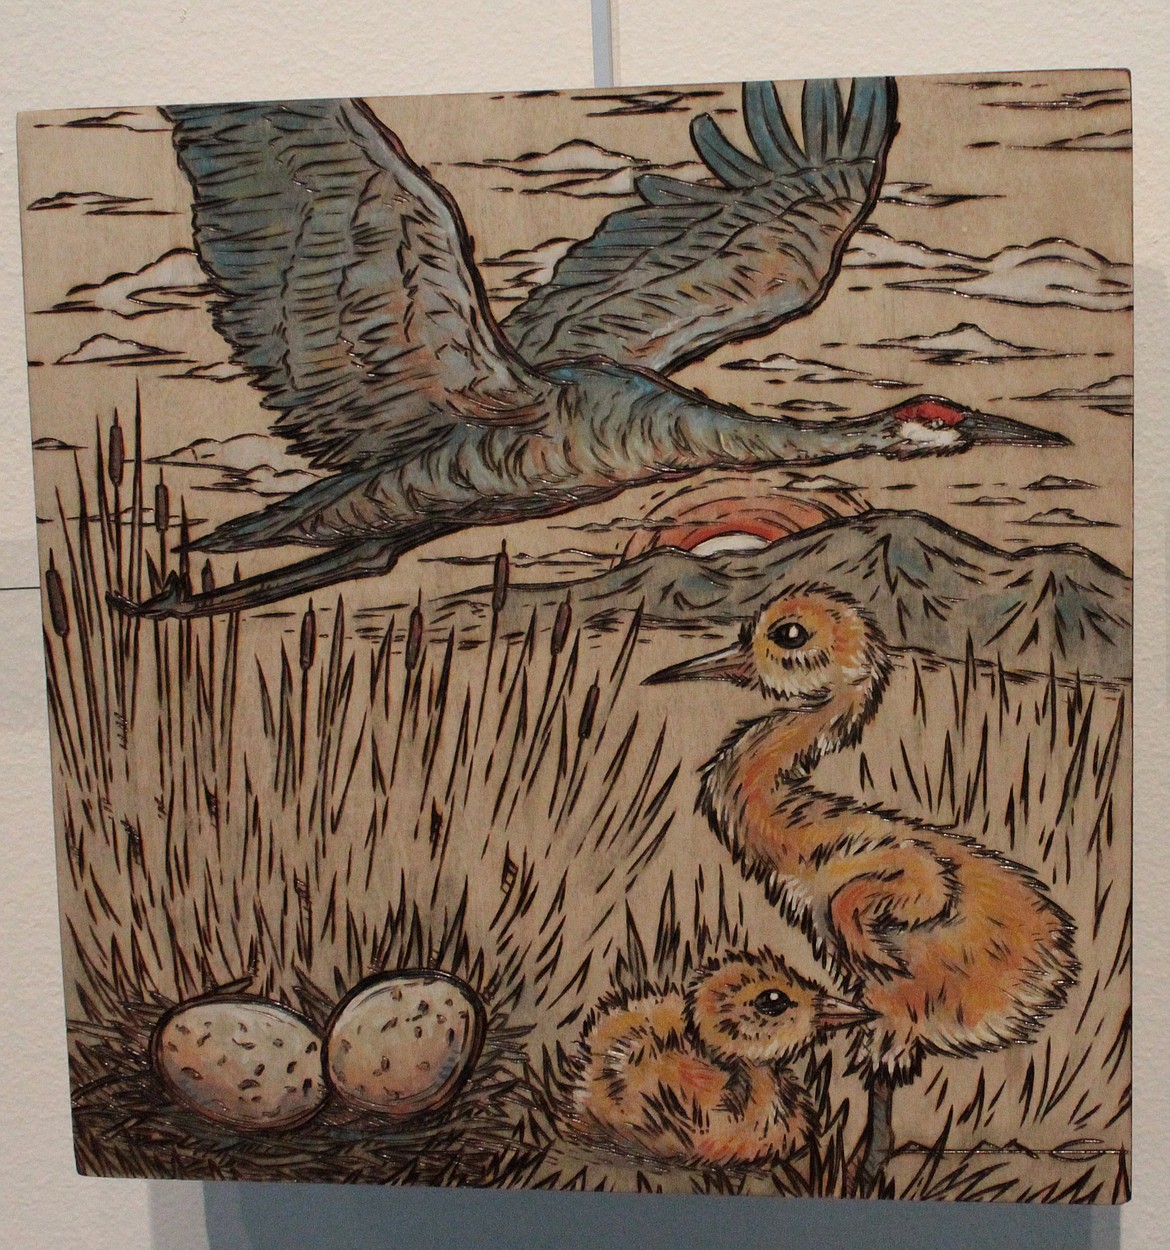 This piece by Ana Li Gresham, showing the life cycle of a sandhill crane, was done by combining wood burning with acrylic paint for vivid color.